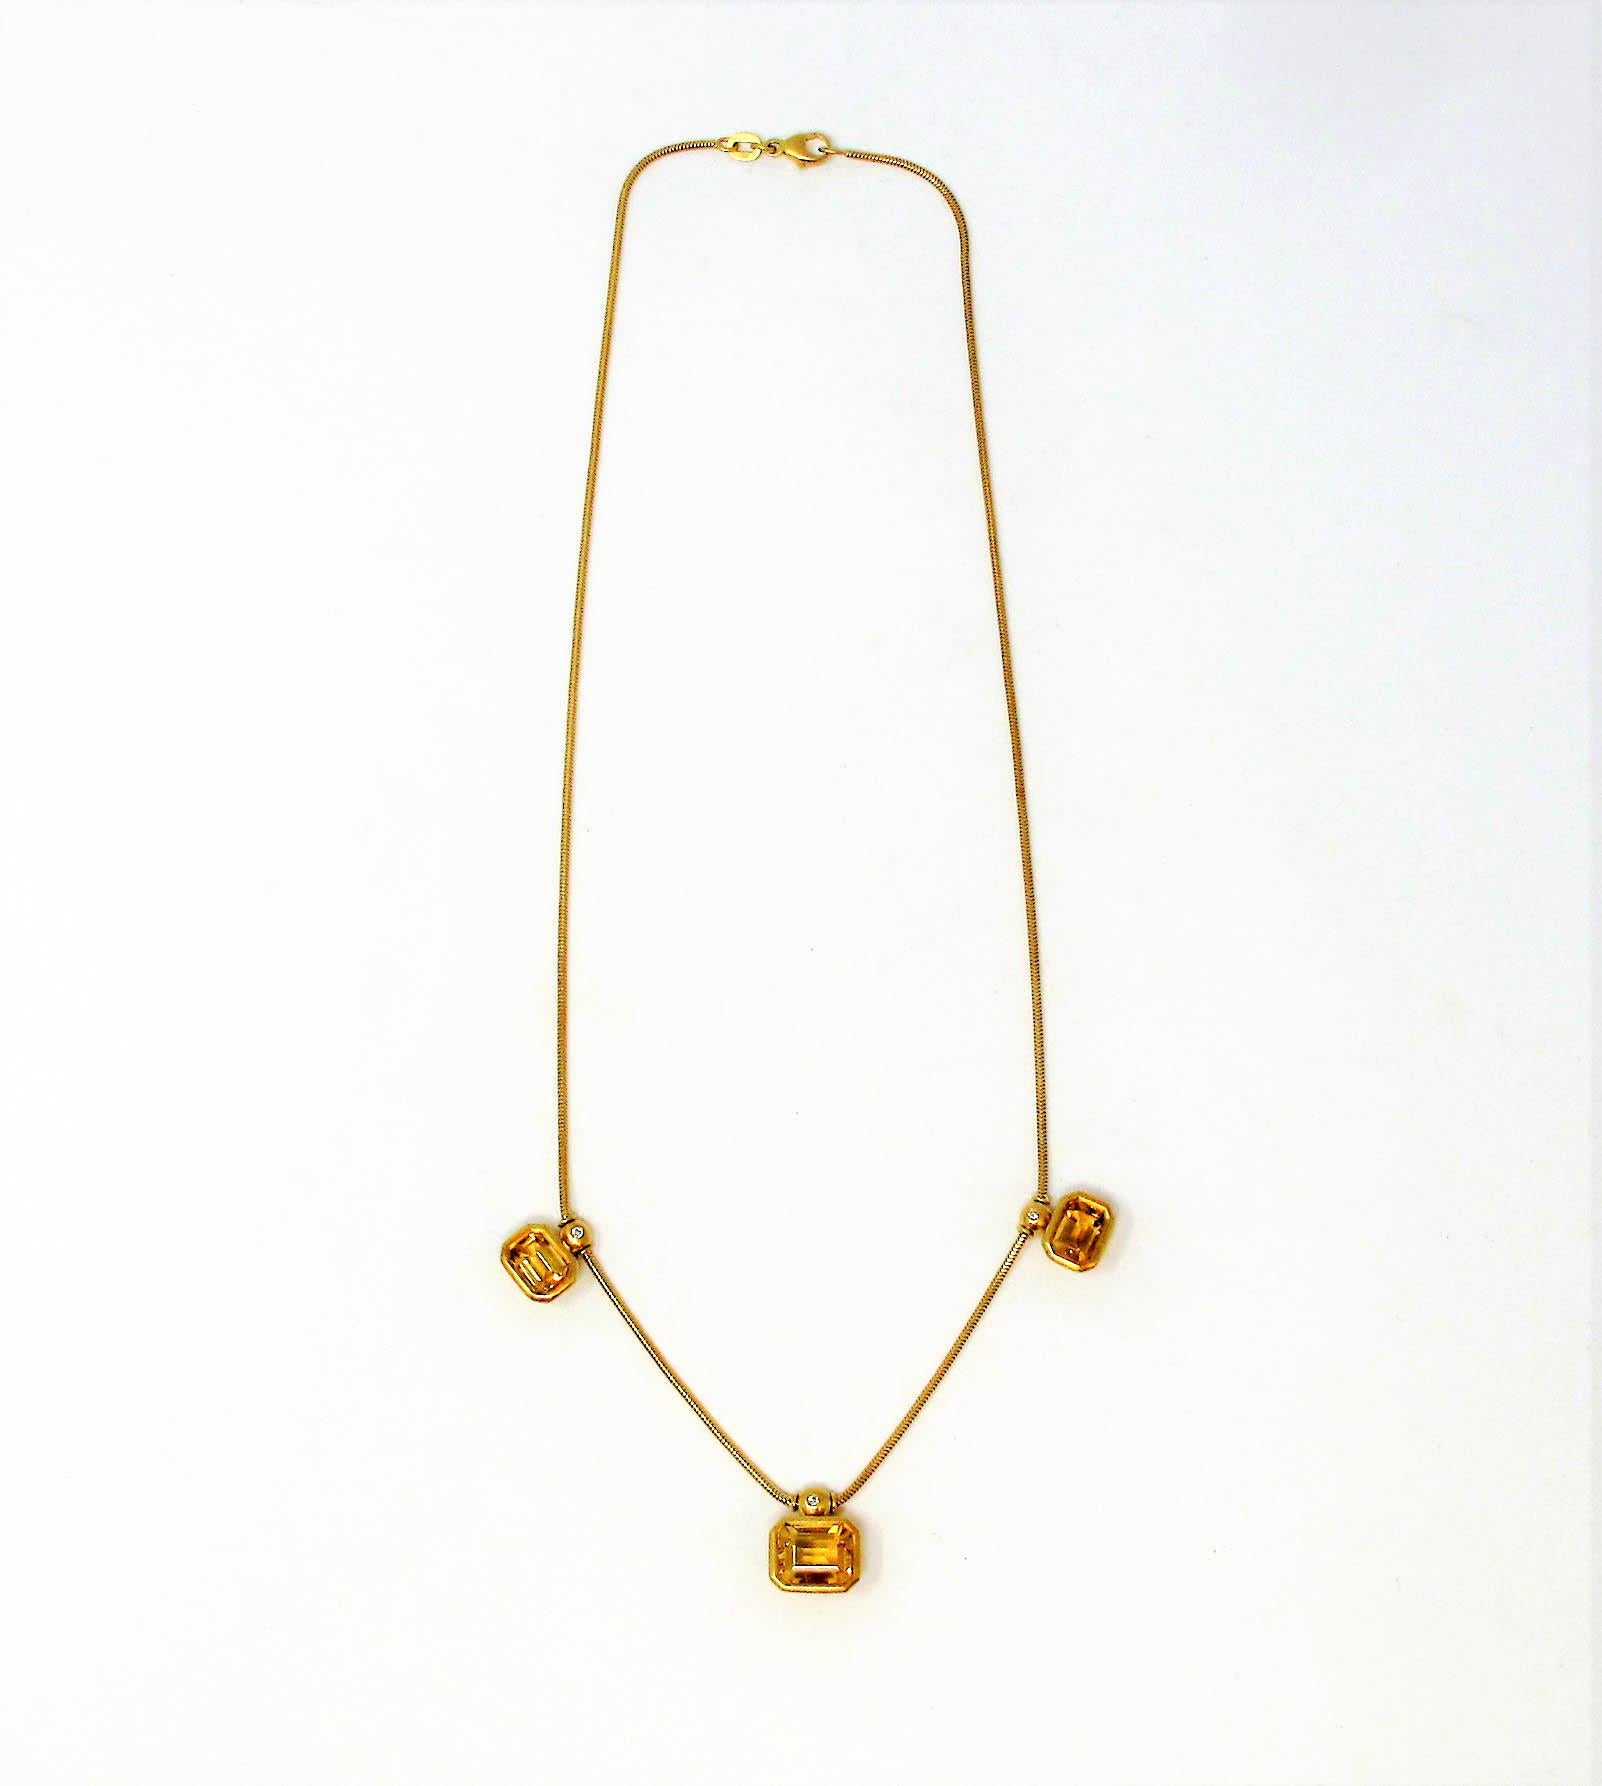 This lovely station necklace adds a rich, golden touch to your look! Beautiful emerald cut citrine stones with just a hint of diamond sparkle make this modern beauty a perfect addition to your jewelry closet.  

This gorgeous station necklace